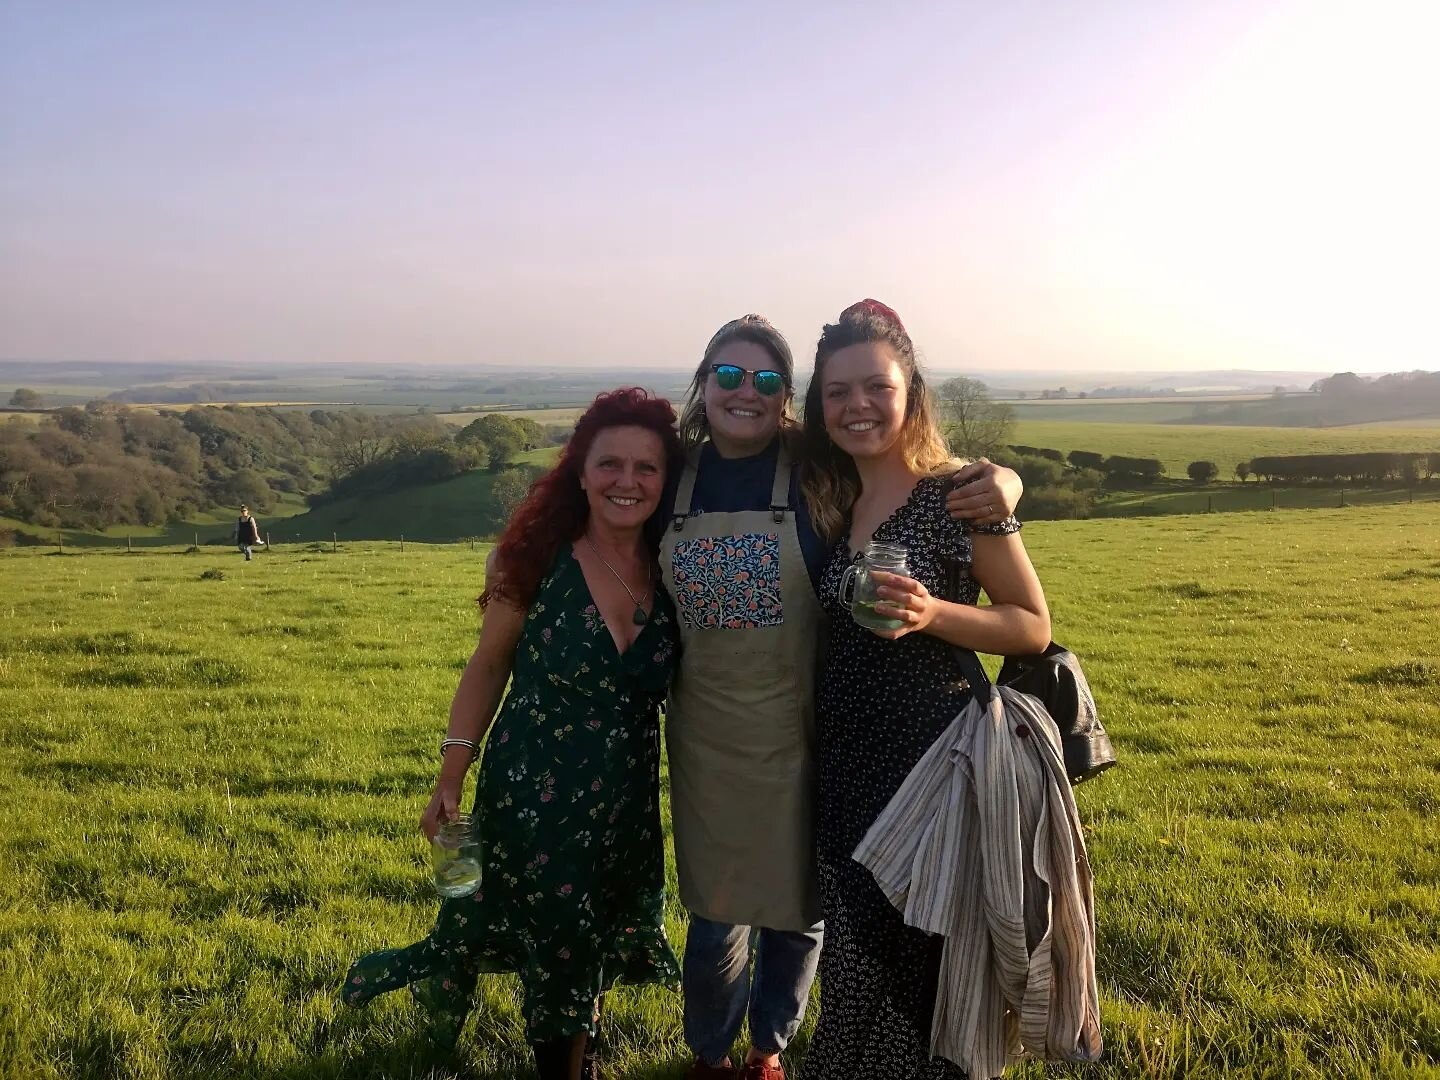 Last Saturday we were invited to speak about the importance of seasonality &amp; local food at Wildfires - a beautiful evening dining on Organic farmland, watching the wonderful @flamesandfeasts cook over open fire.

We loved the chance to relax and 